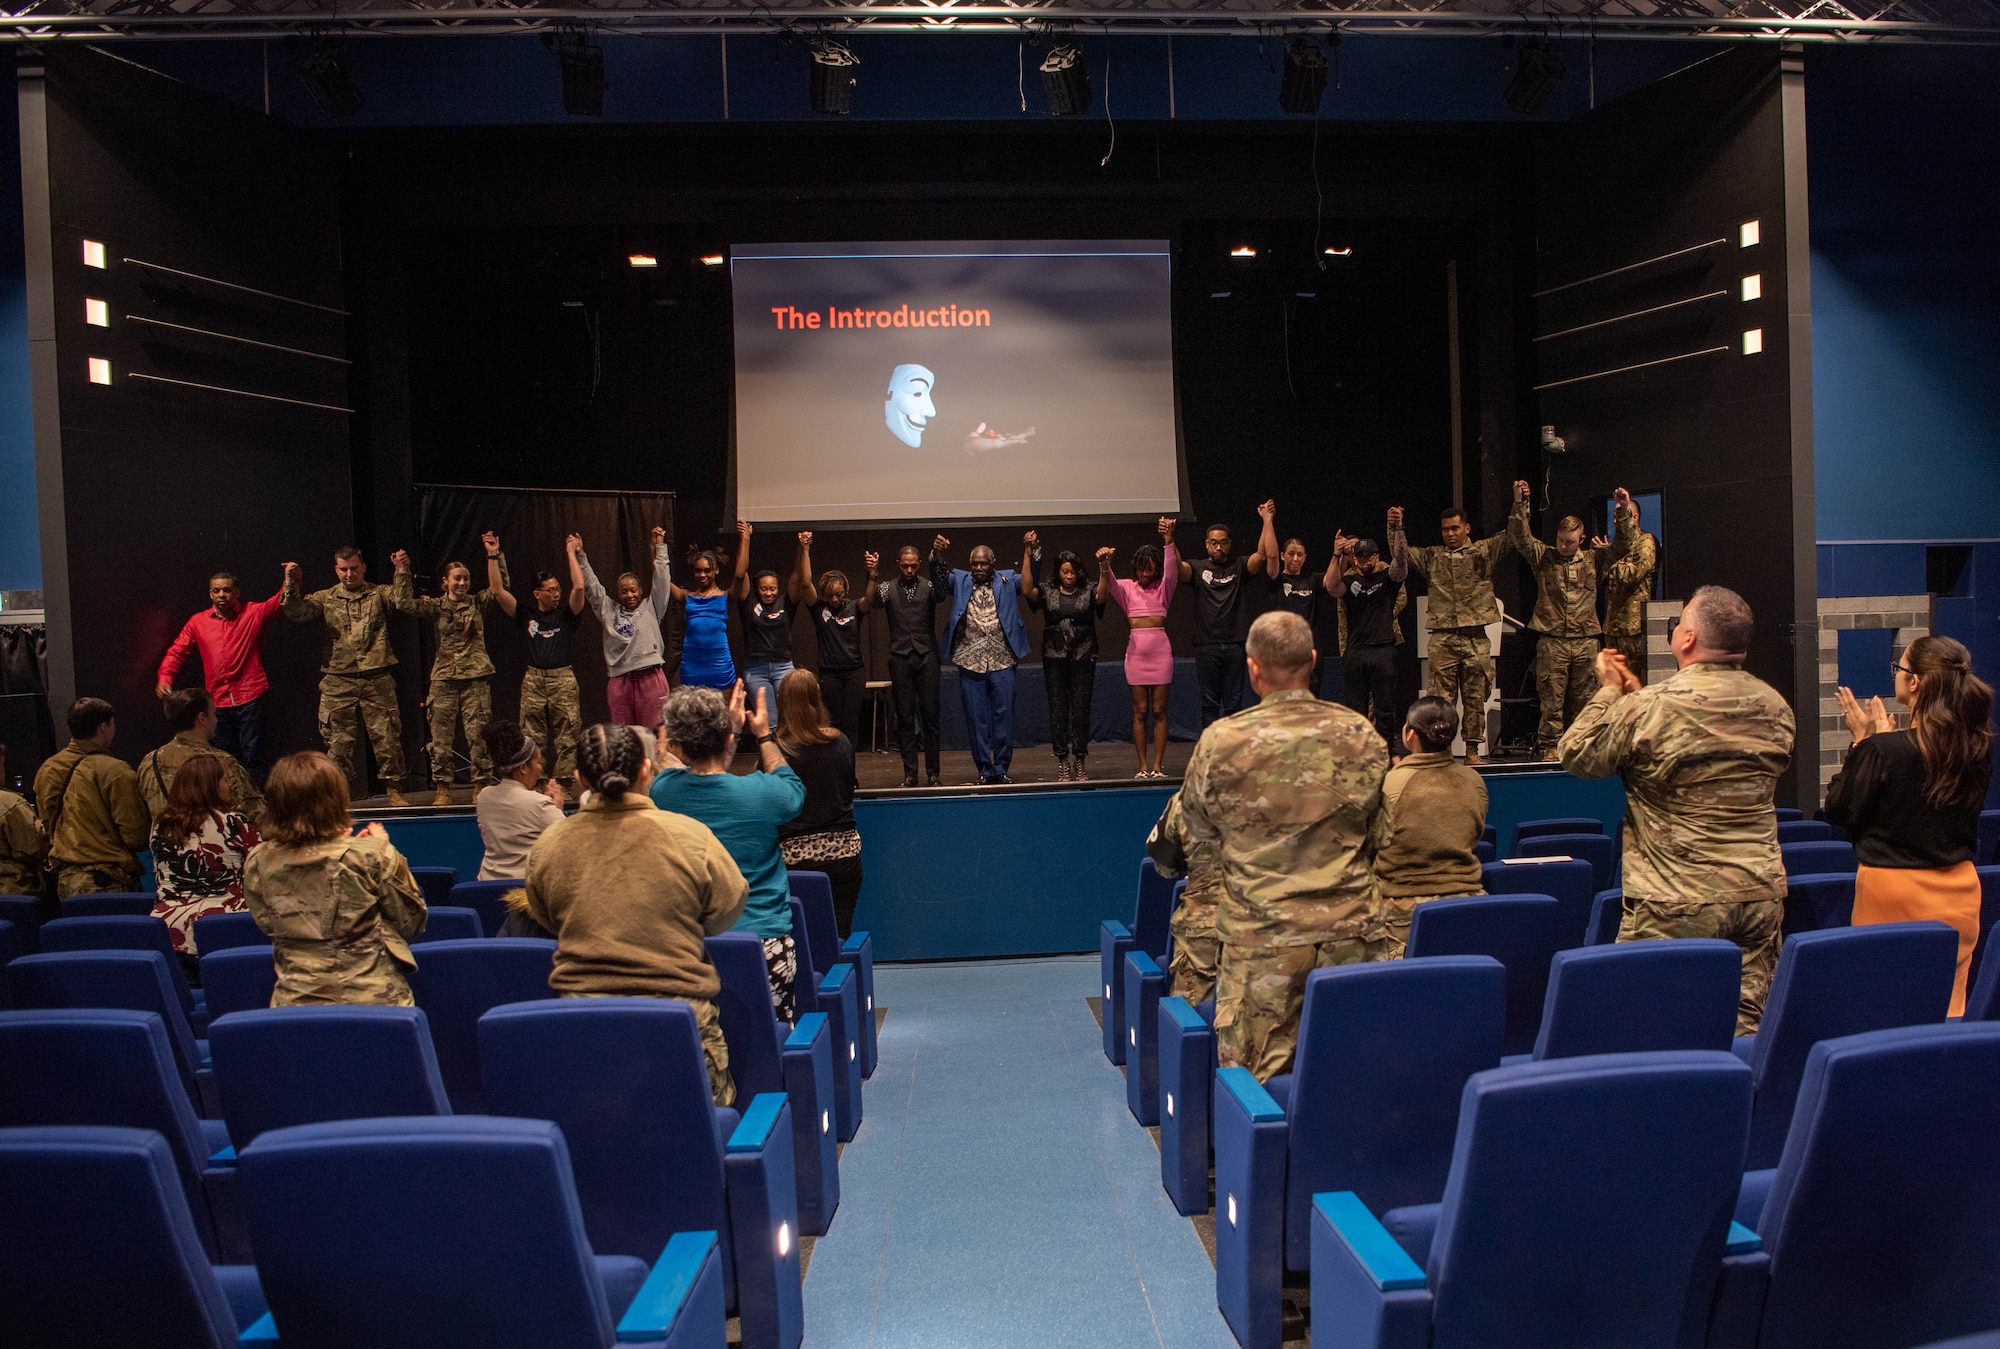 Cast and crew members take a bow at the end of the play, “The Introduction,” in honor of Sexual Assault Awareness and Prevention Month at Ramstein Air Base, Germany on April 20, 2023.